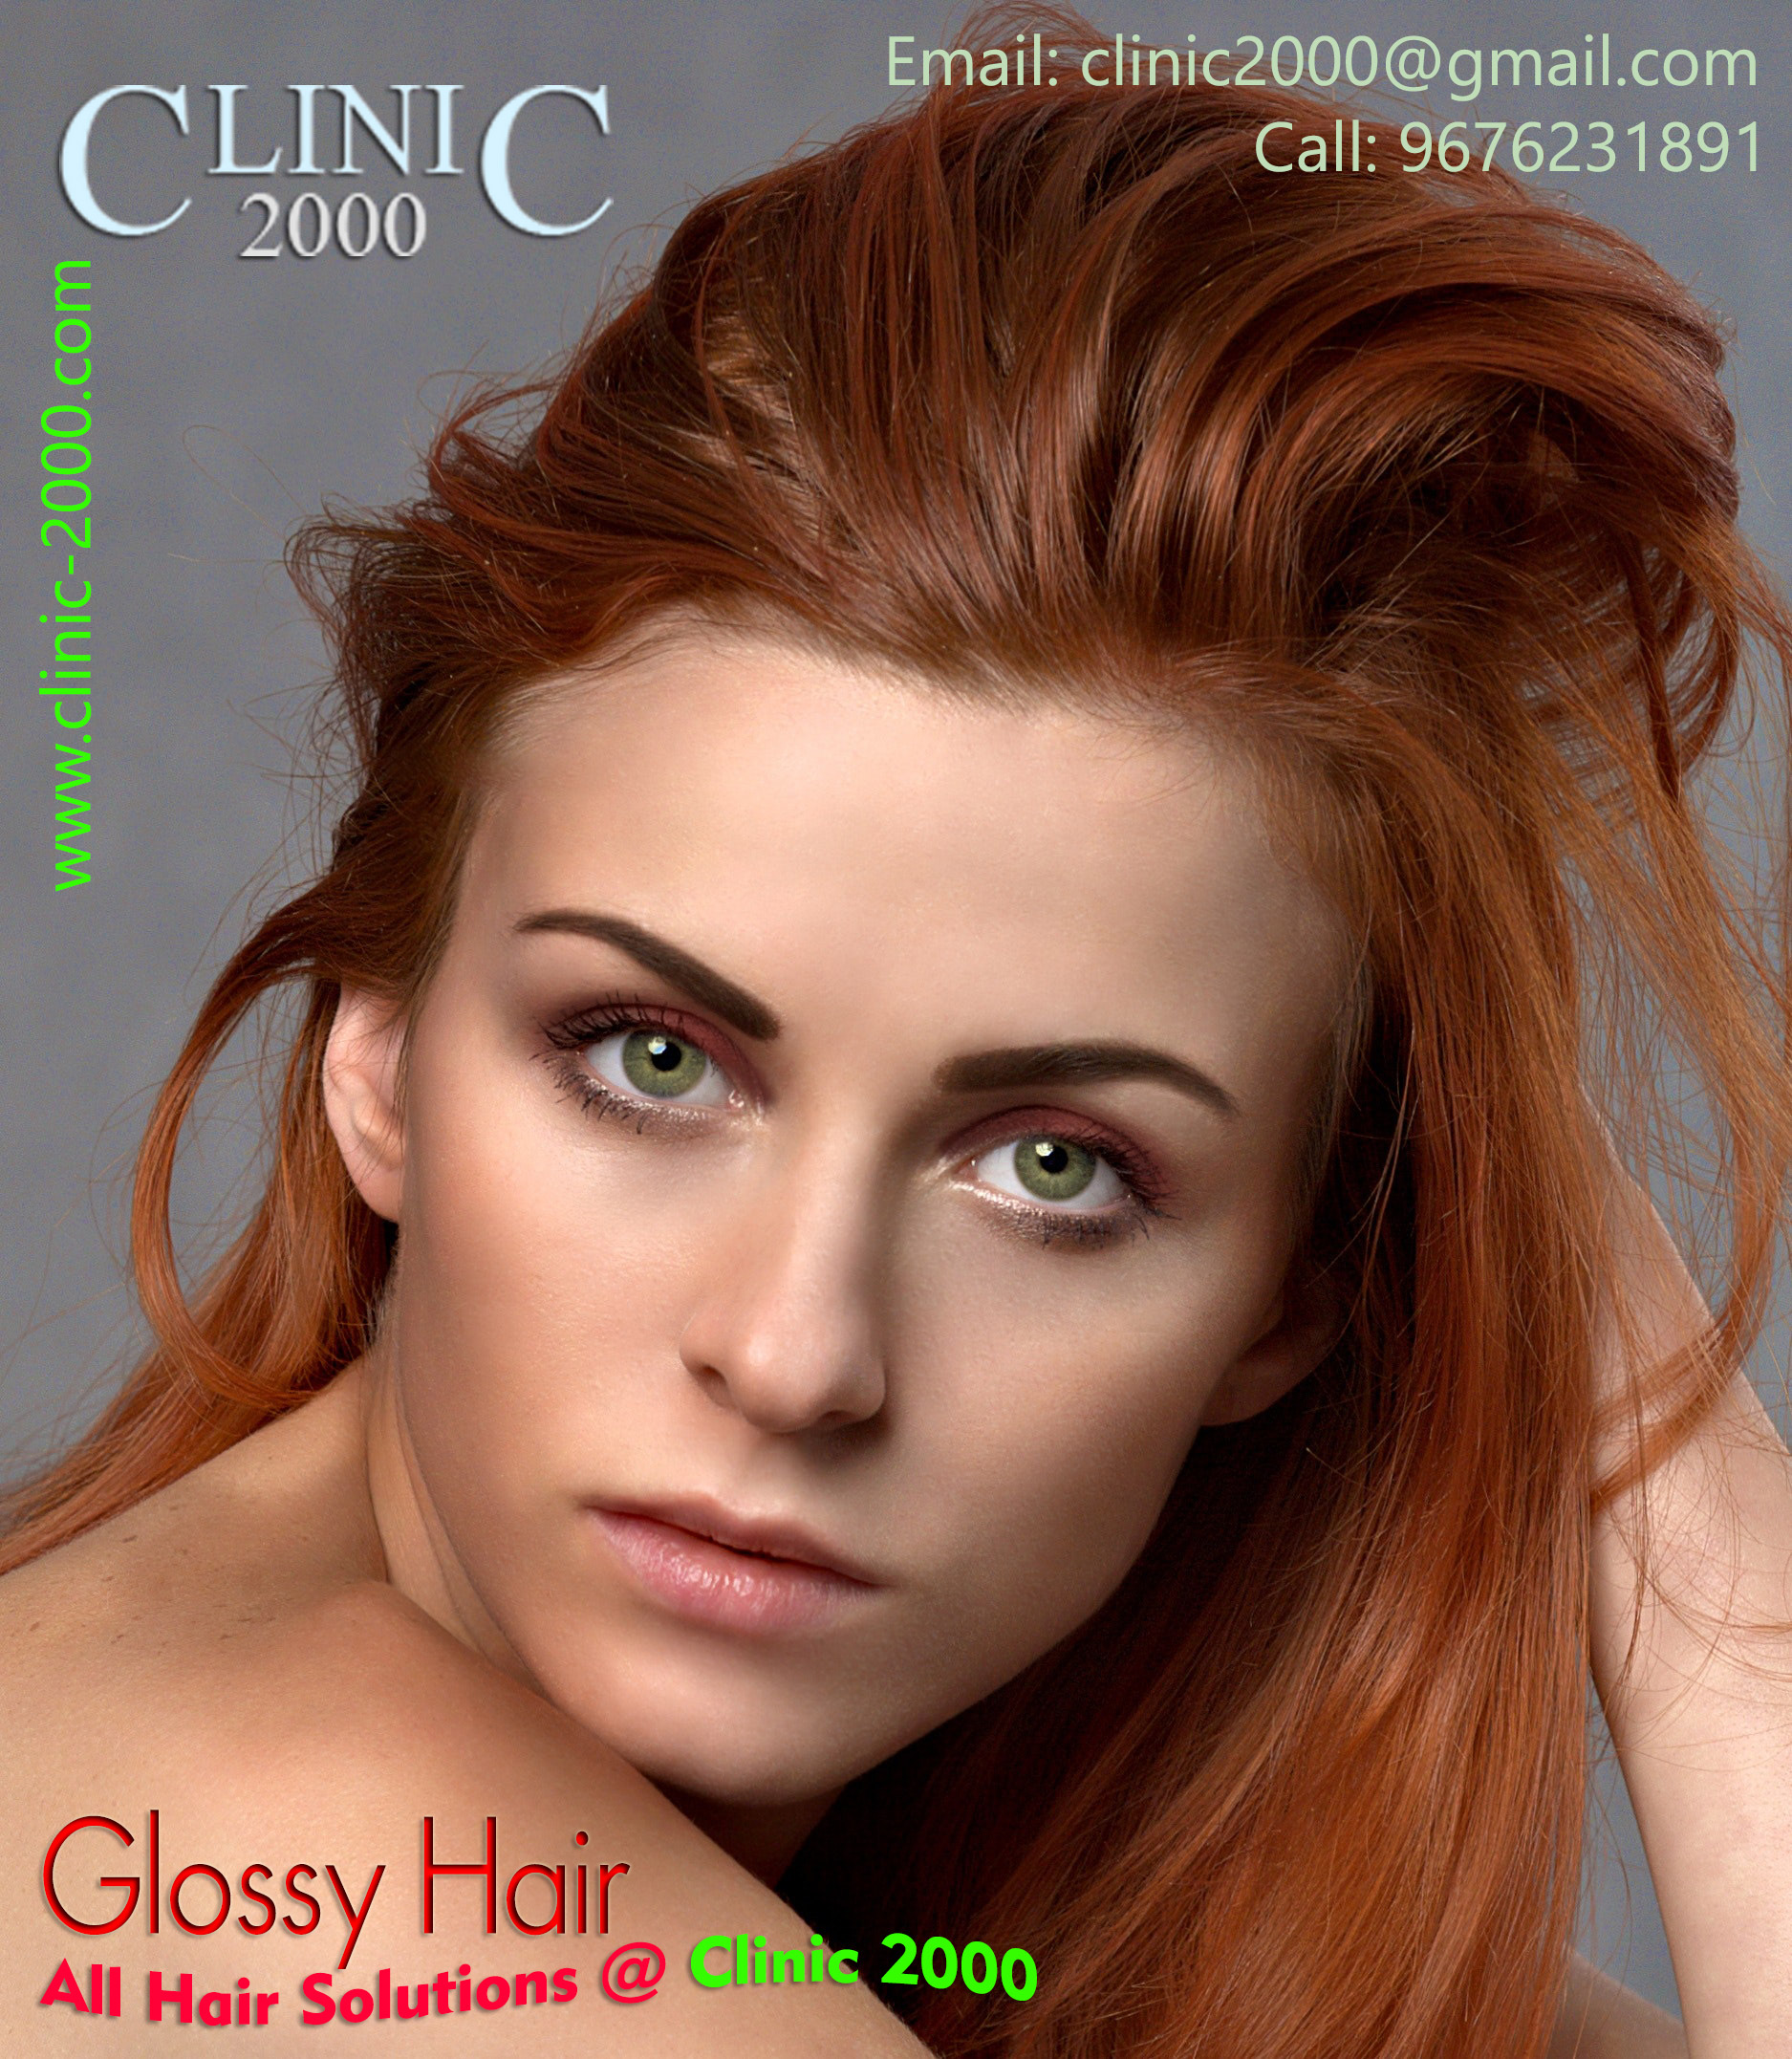 Grow your Hair like Glossy at Clinic 2000